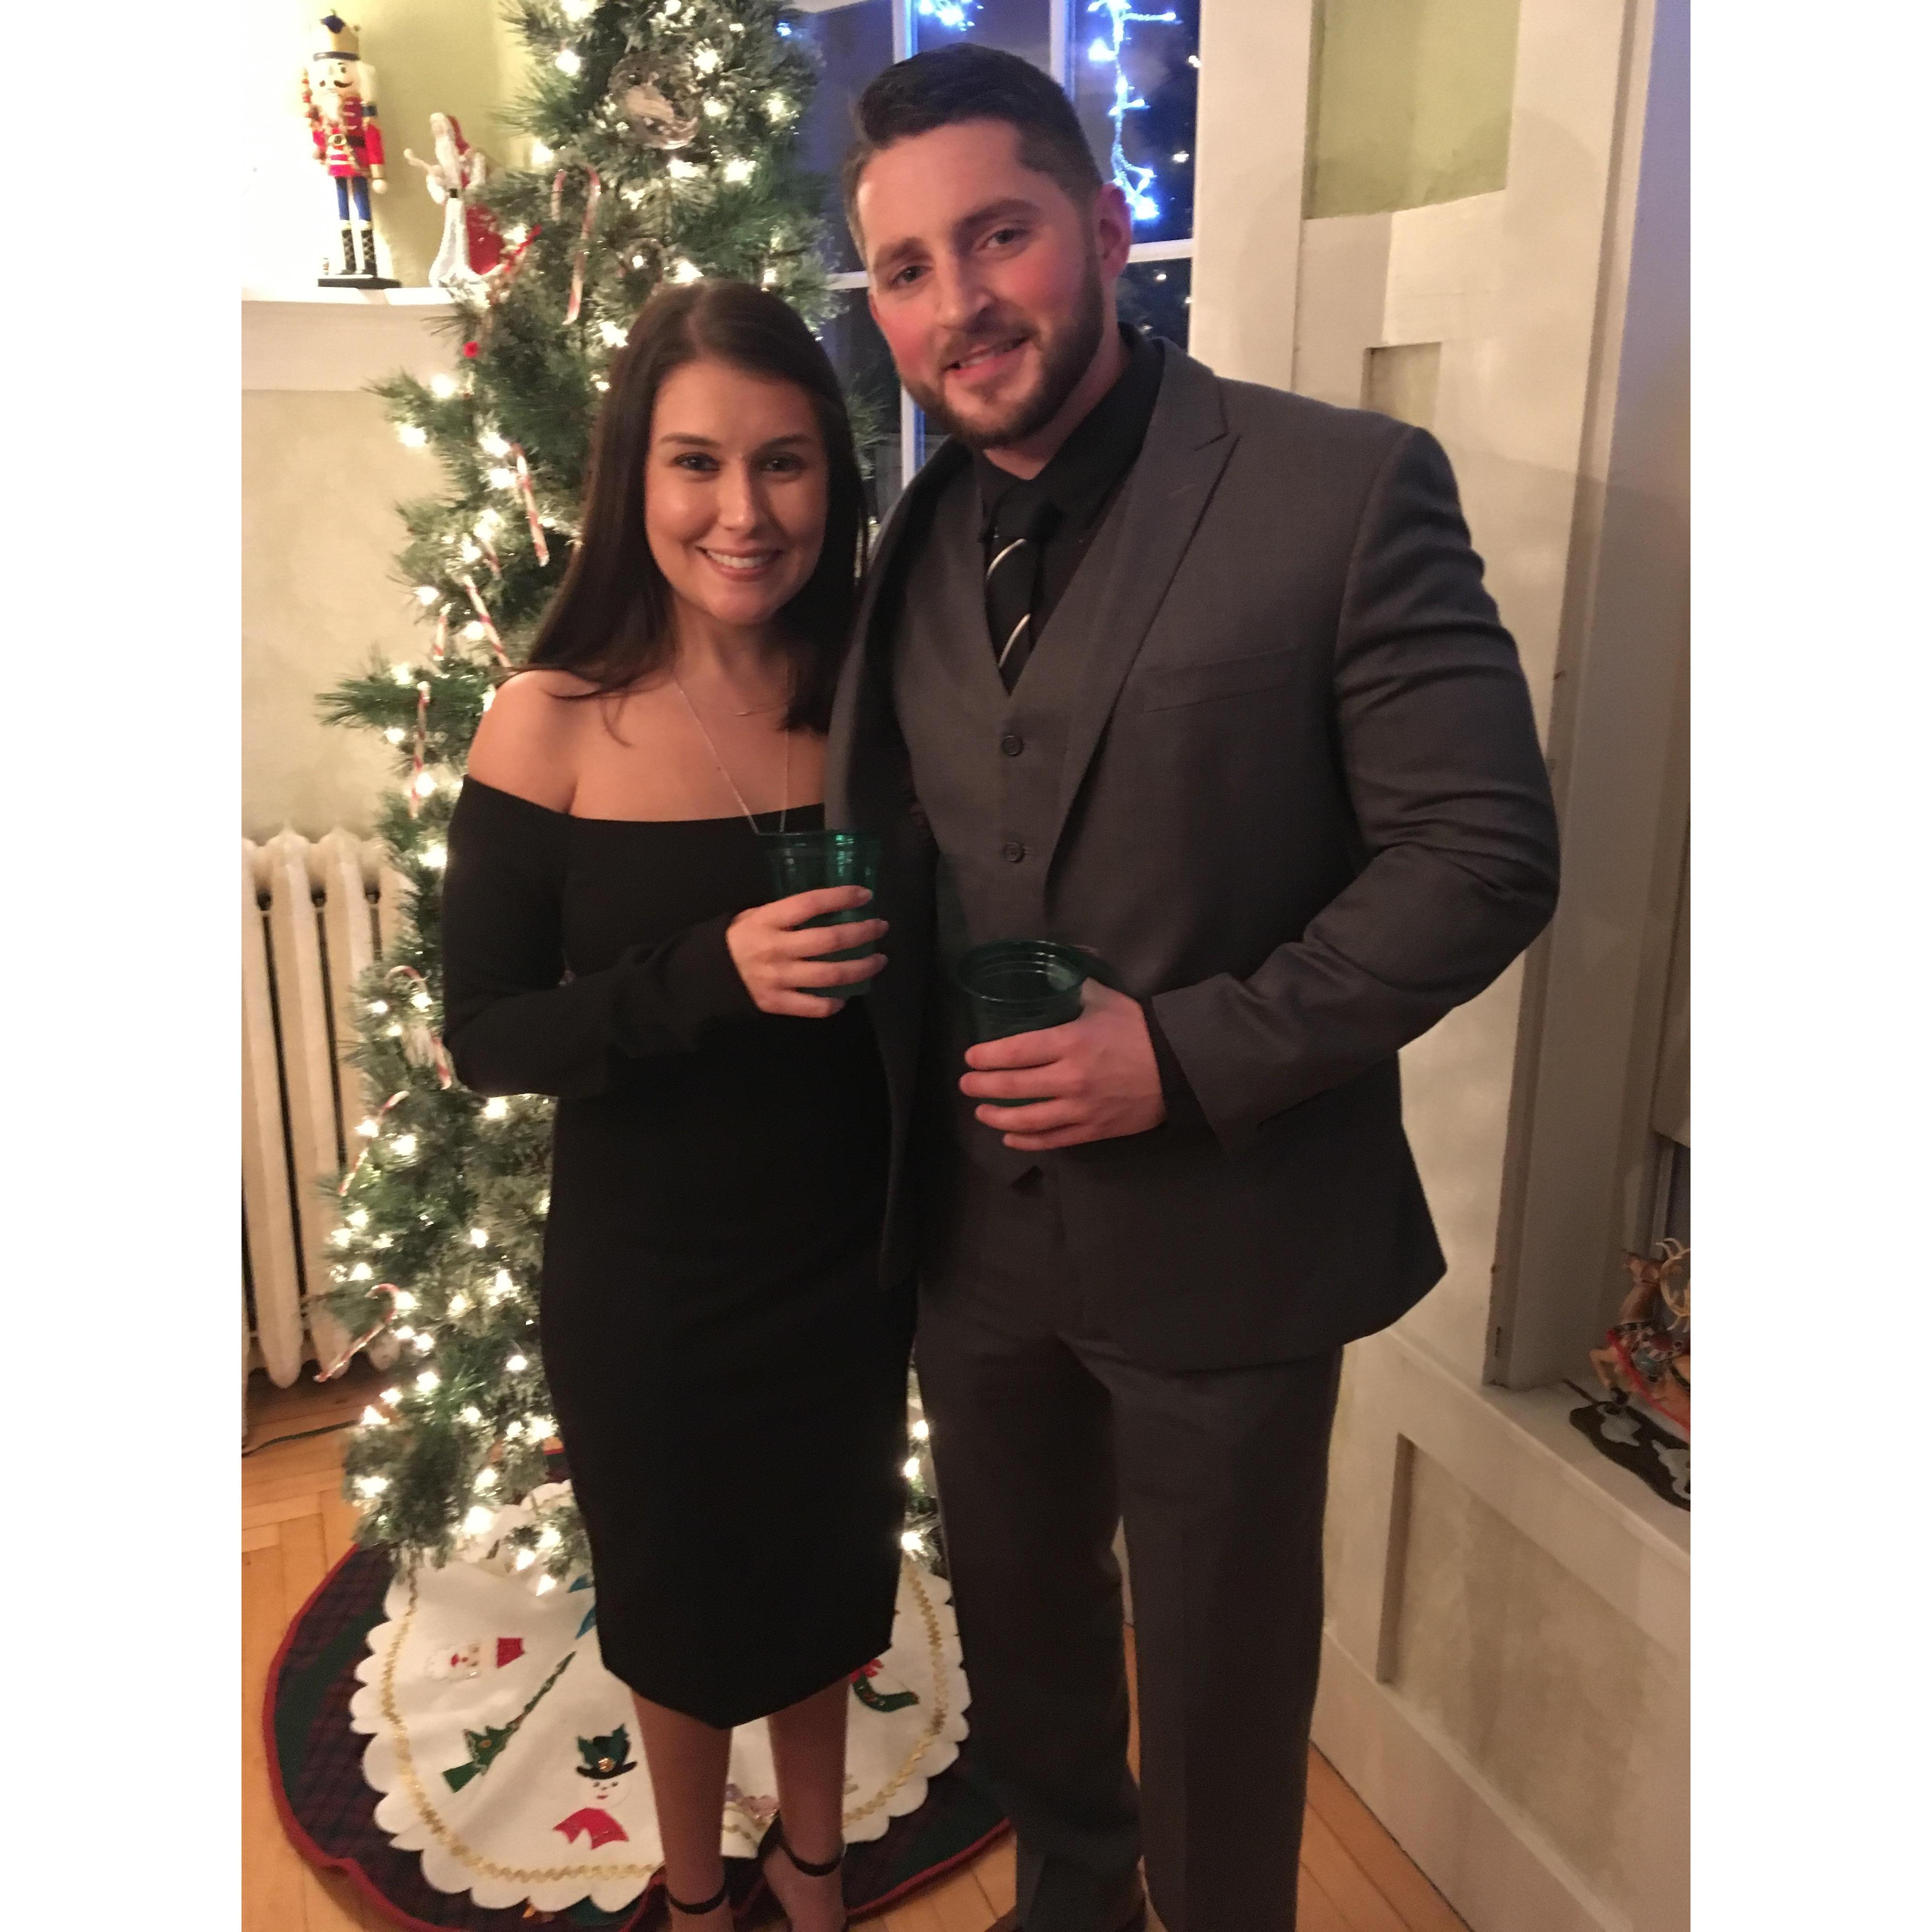 First new years as a couple :)